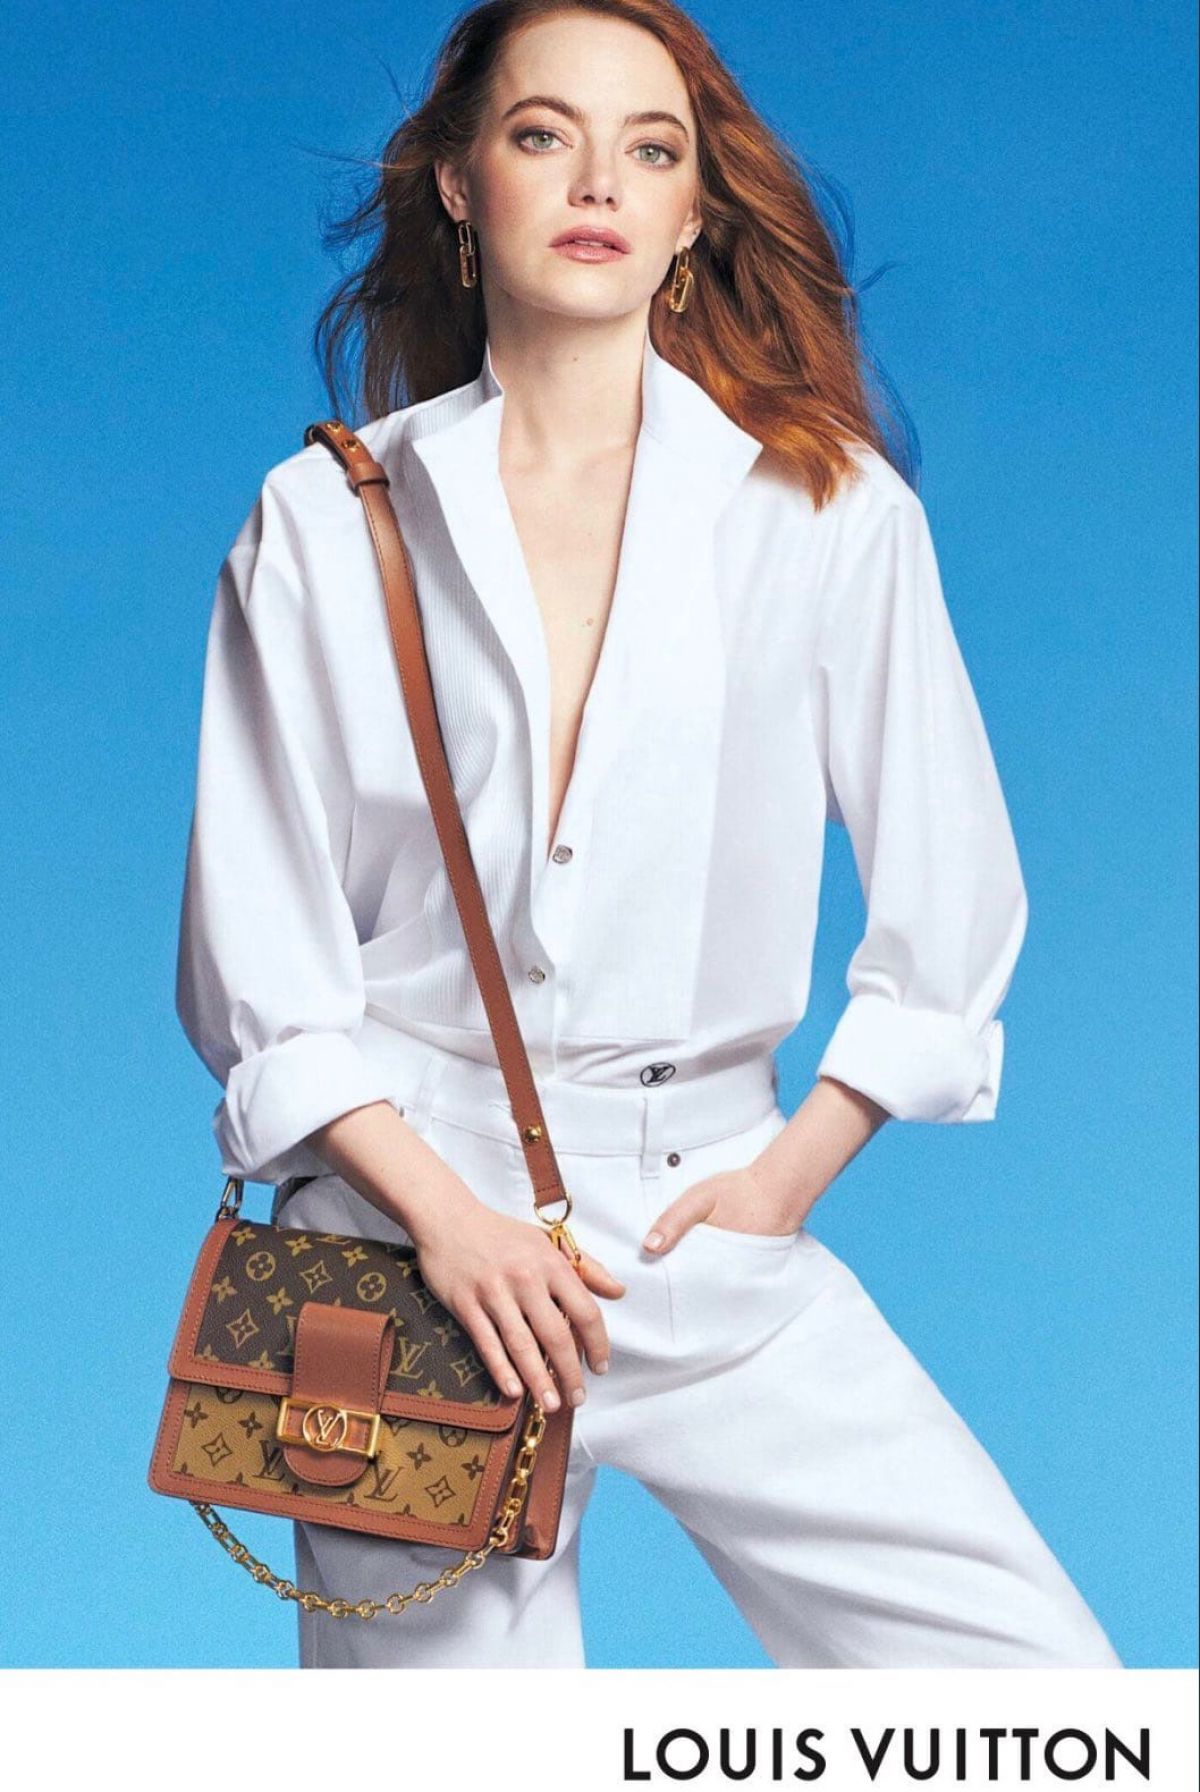 Emma Stone Daily — Louis Vuitton's 'Spirit of Travel' campaign